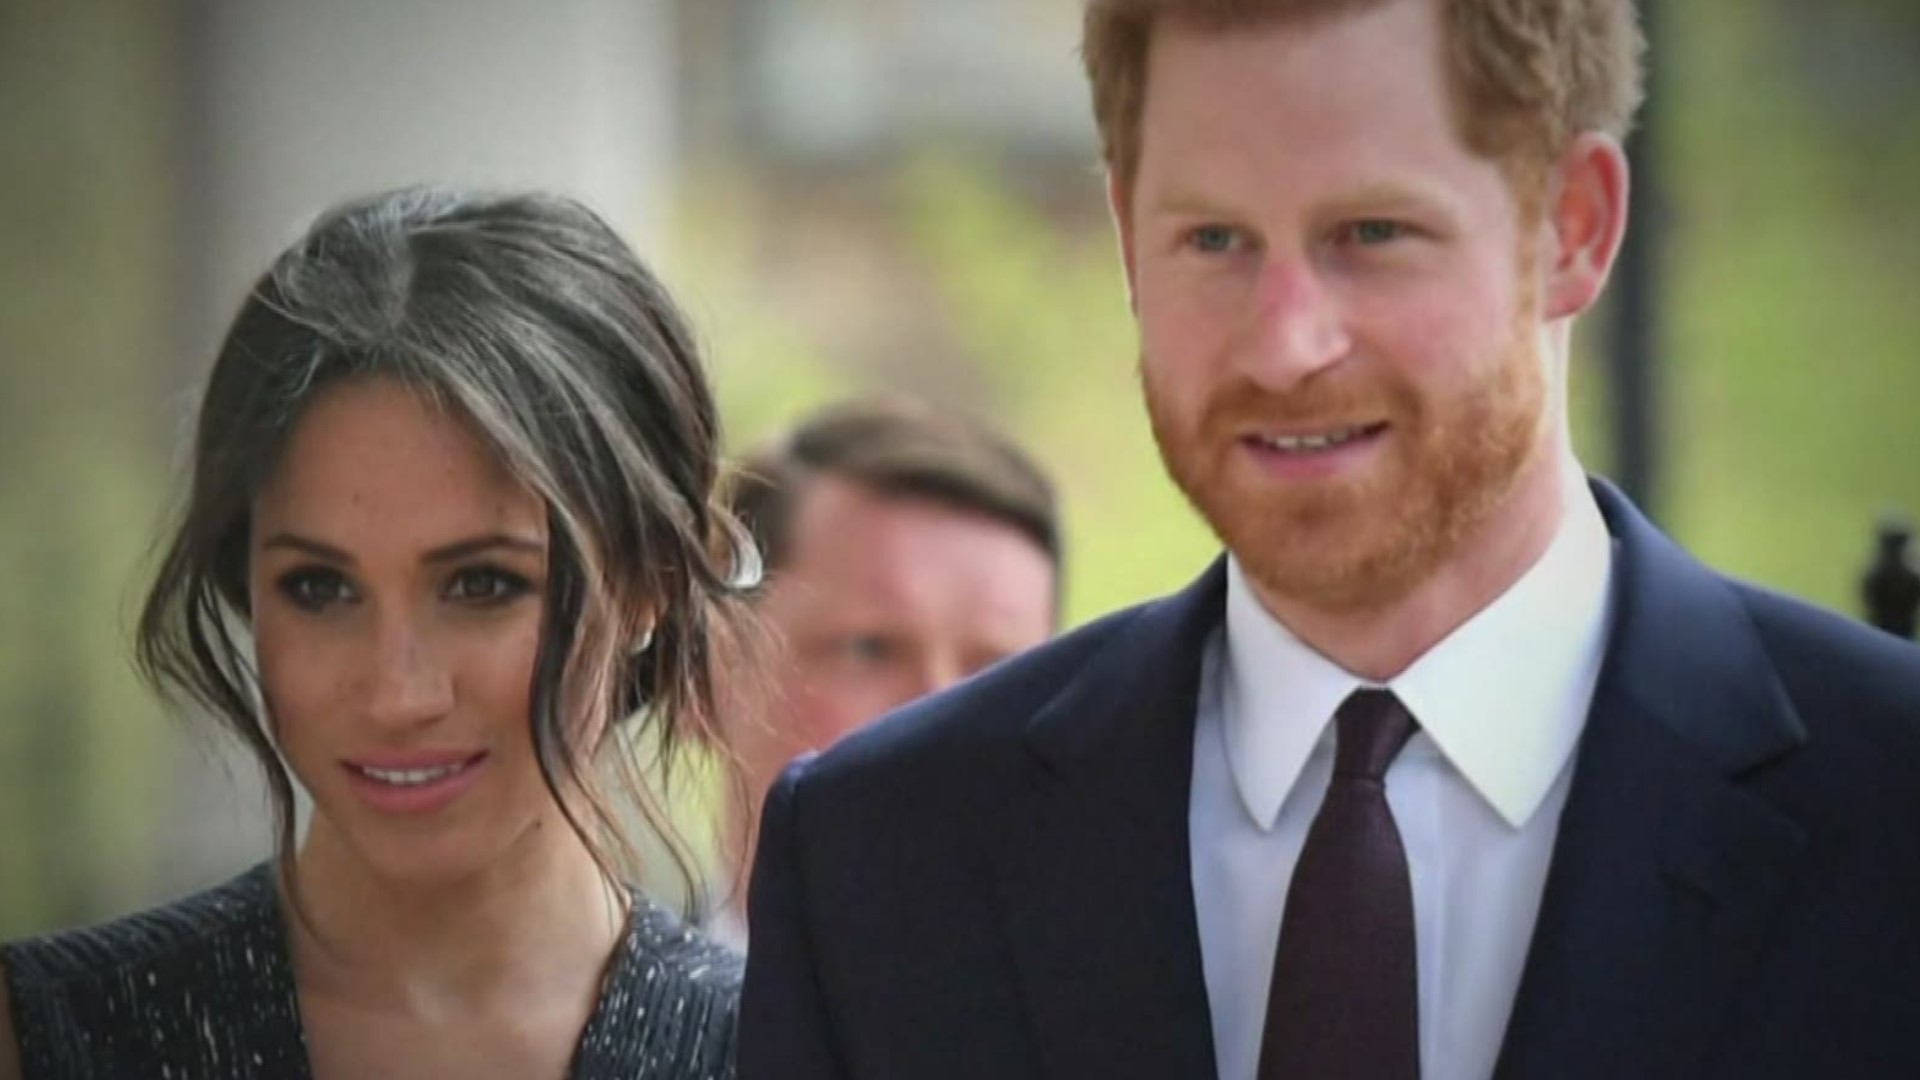 Prince Harry and Meghan Markle, the Duke and Duchess of Sussex, made world headlines announcing they will "step away" from their royal family duties.